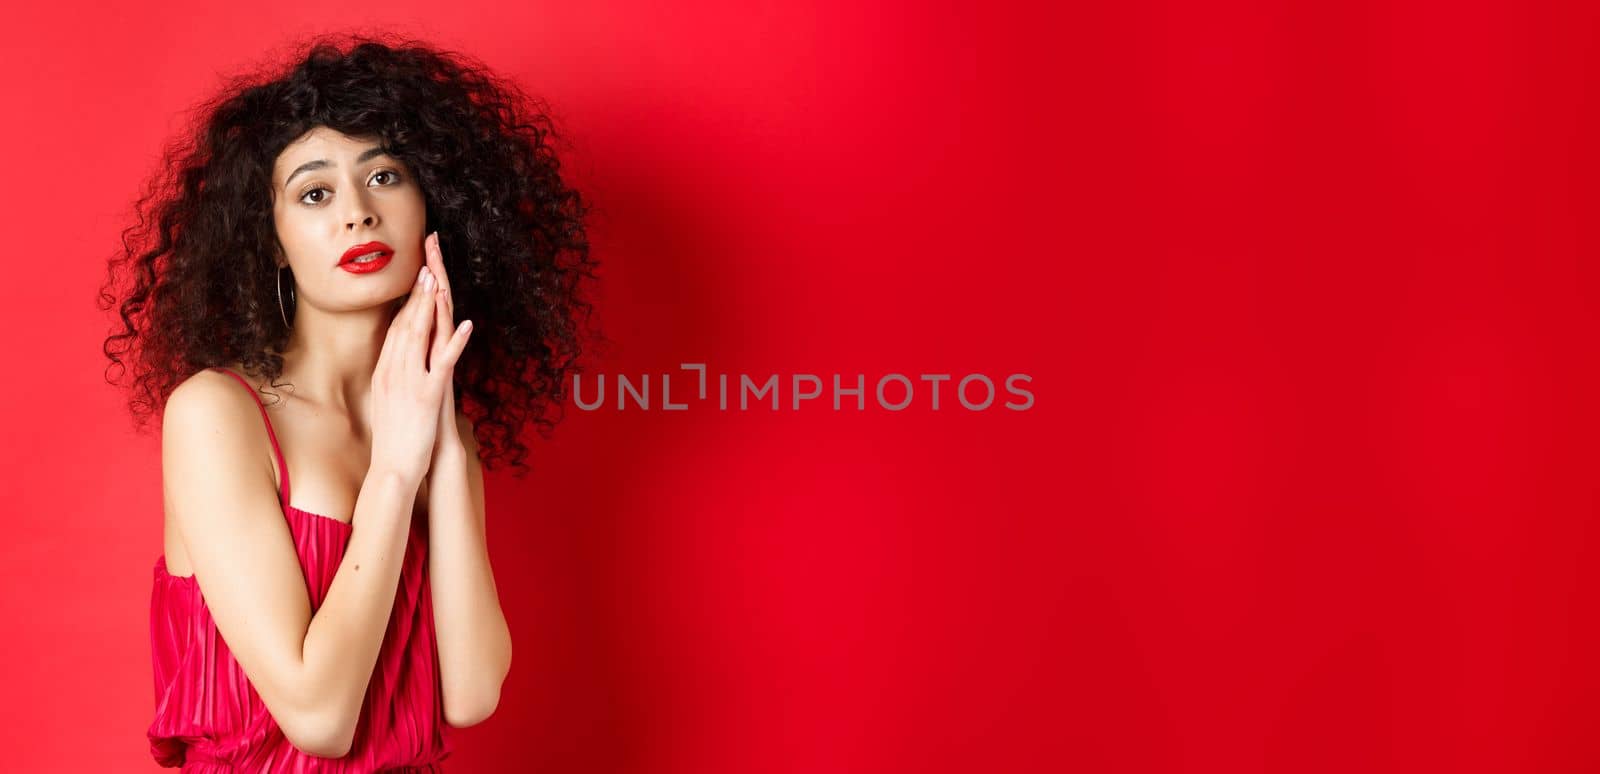 Romantic sensual woman with curly hair, wearing evening dress, posing seductive on red background.